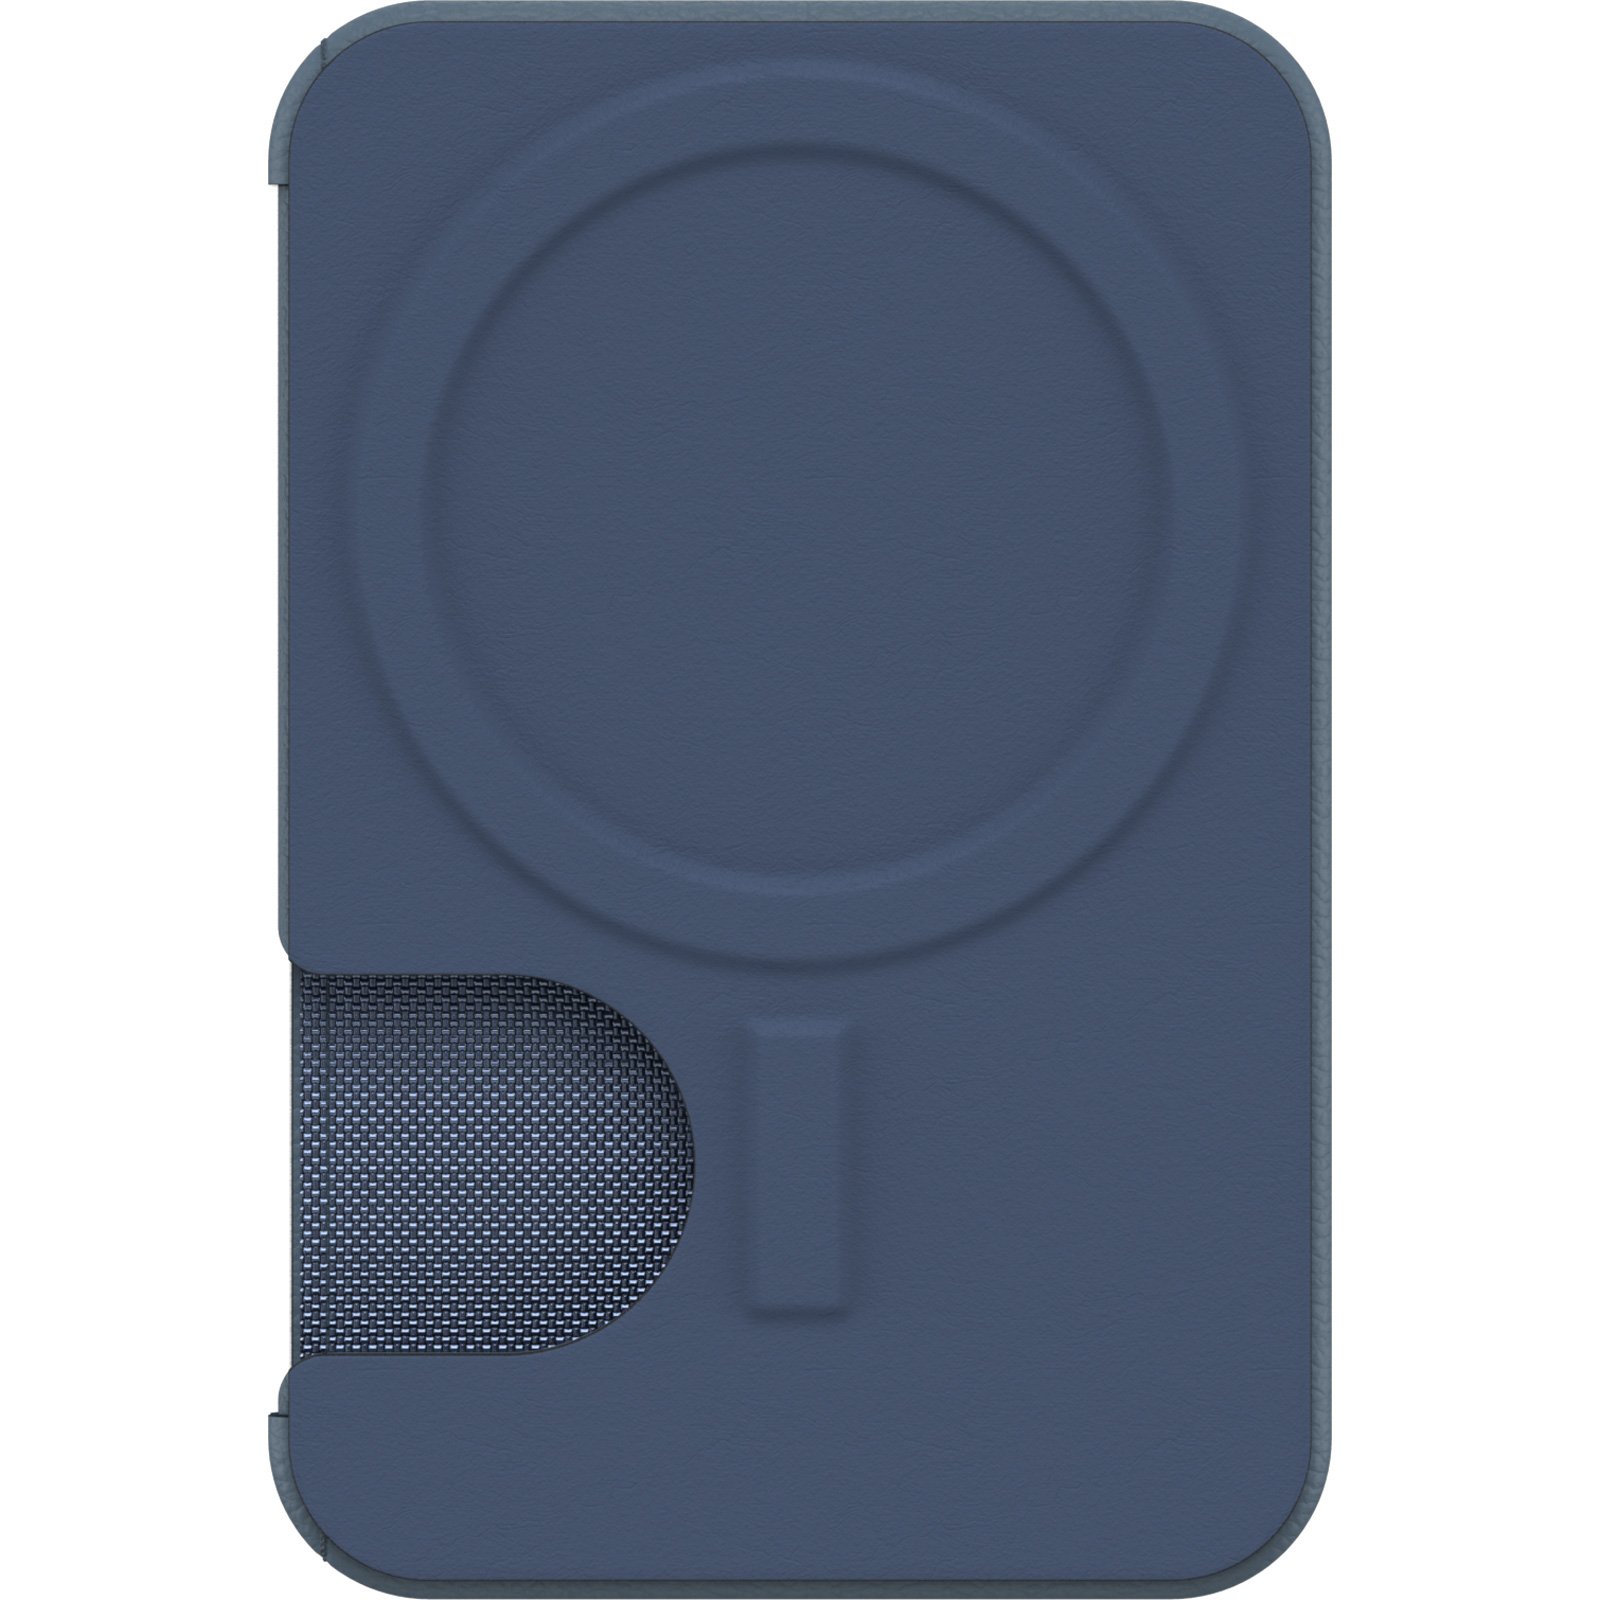 Speaker Mag Go ultra-compact MagSafe